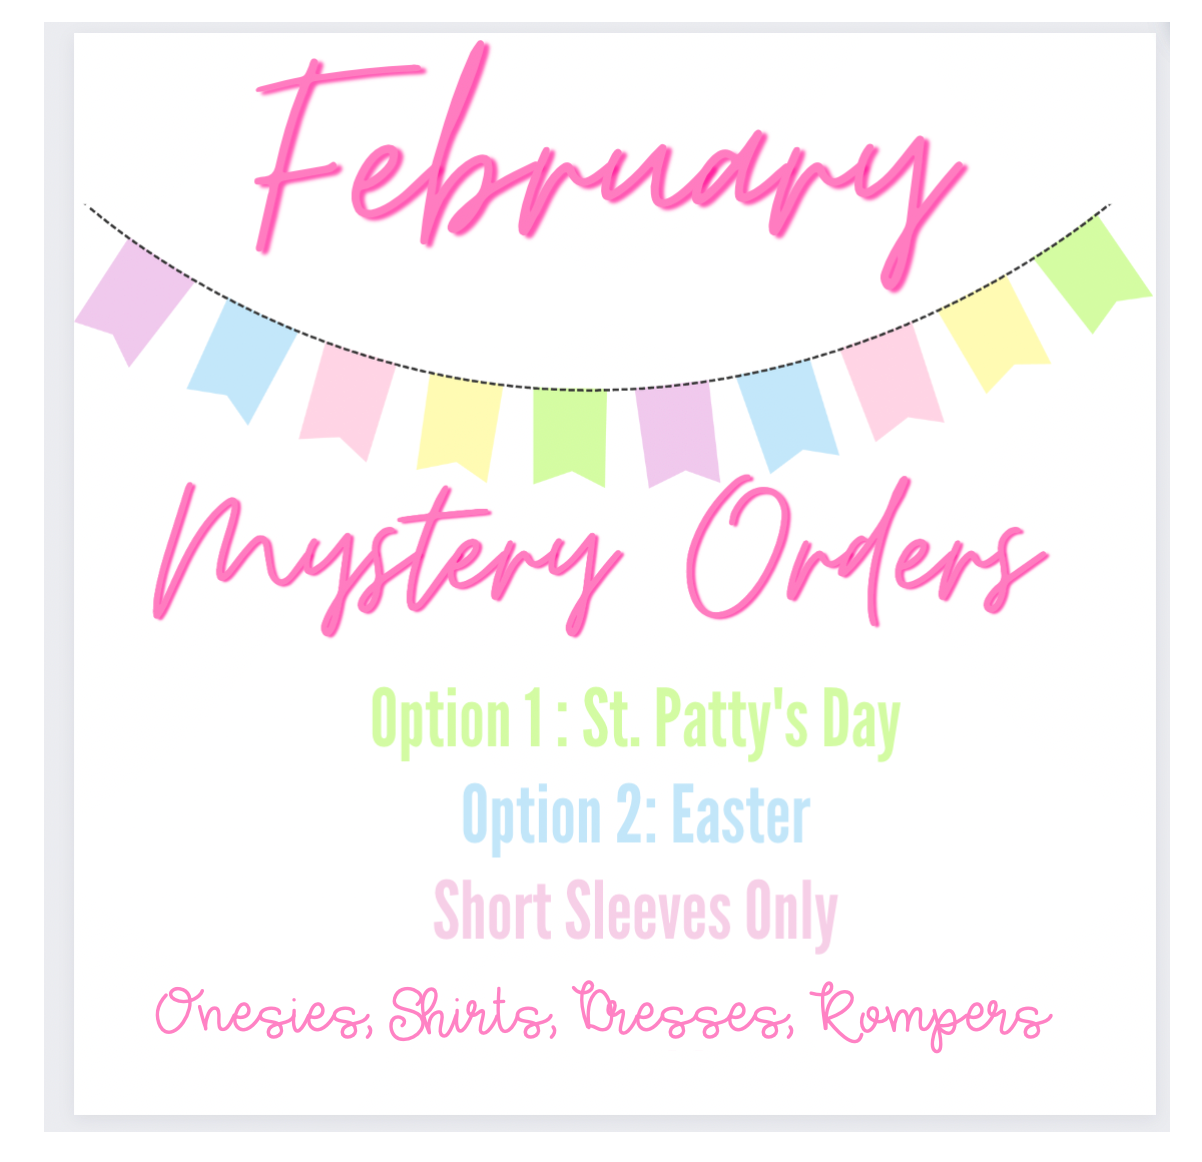 FEBRUARY MYSTERY SHIRTS/DRESSES/ROMPERS